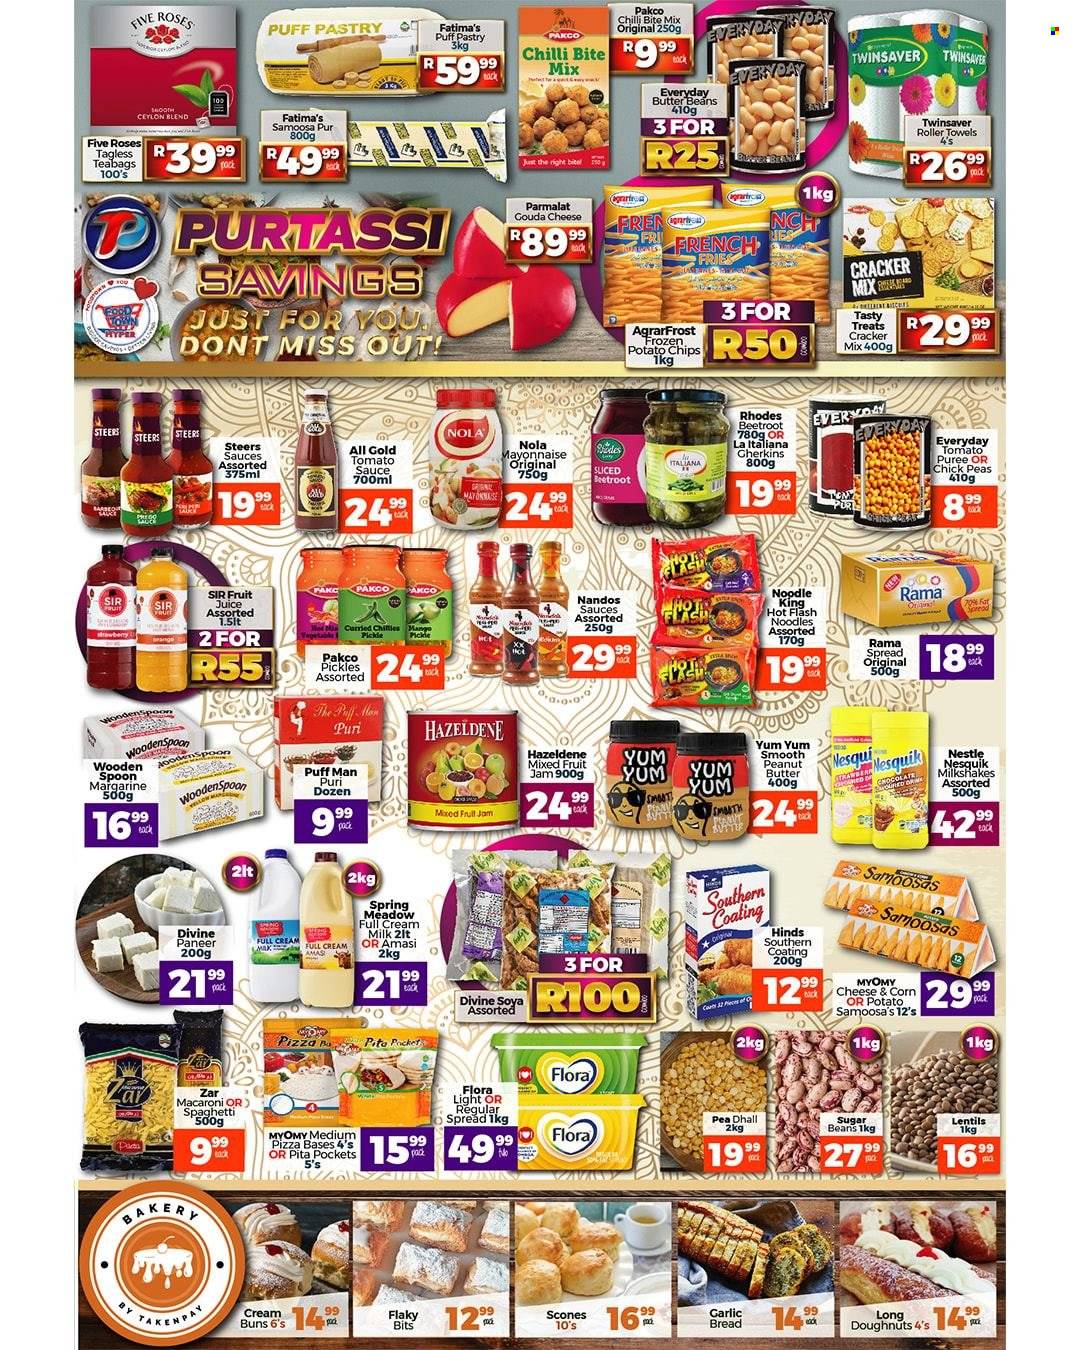 Take n Pay specials - 09.14.2021 - 09.19.2021. 